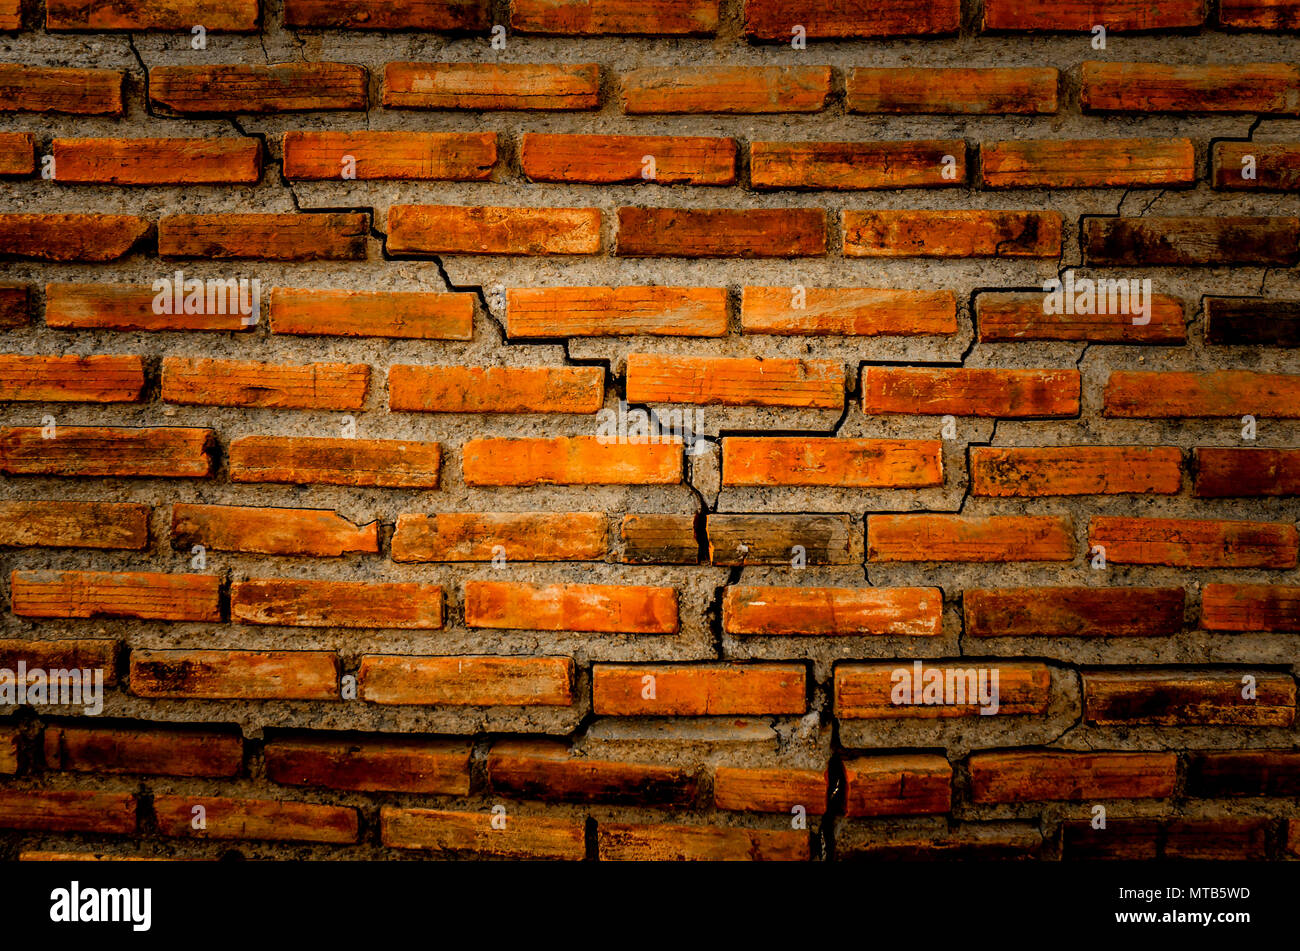 Worn And Cracked Fire Bricks Texture Stock Photo - Download Image